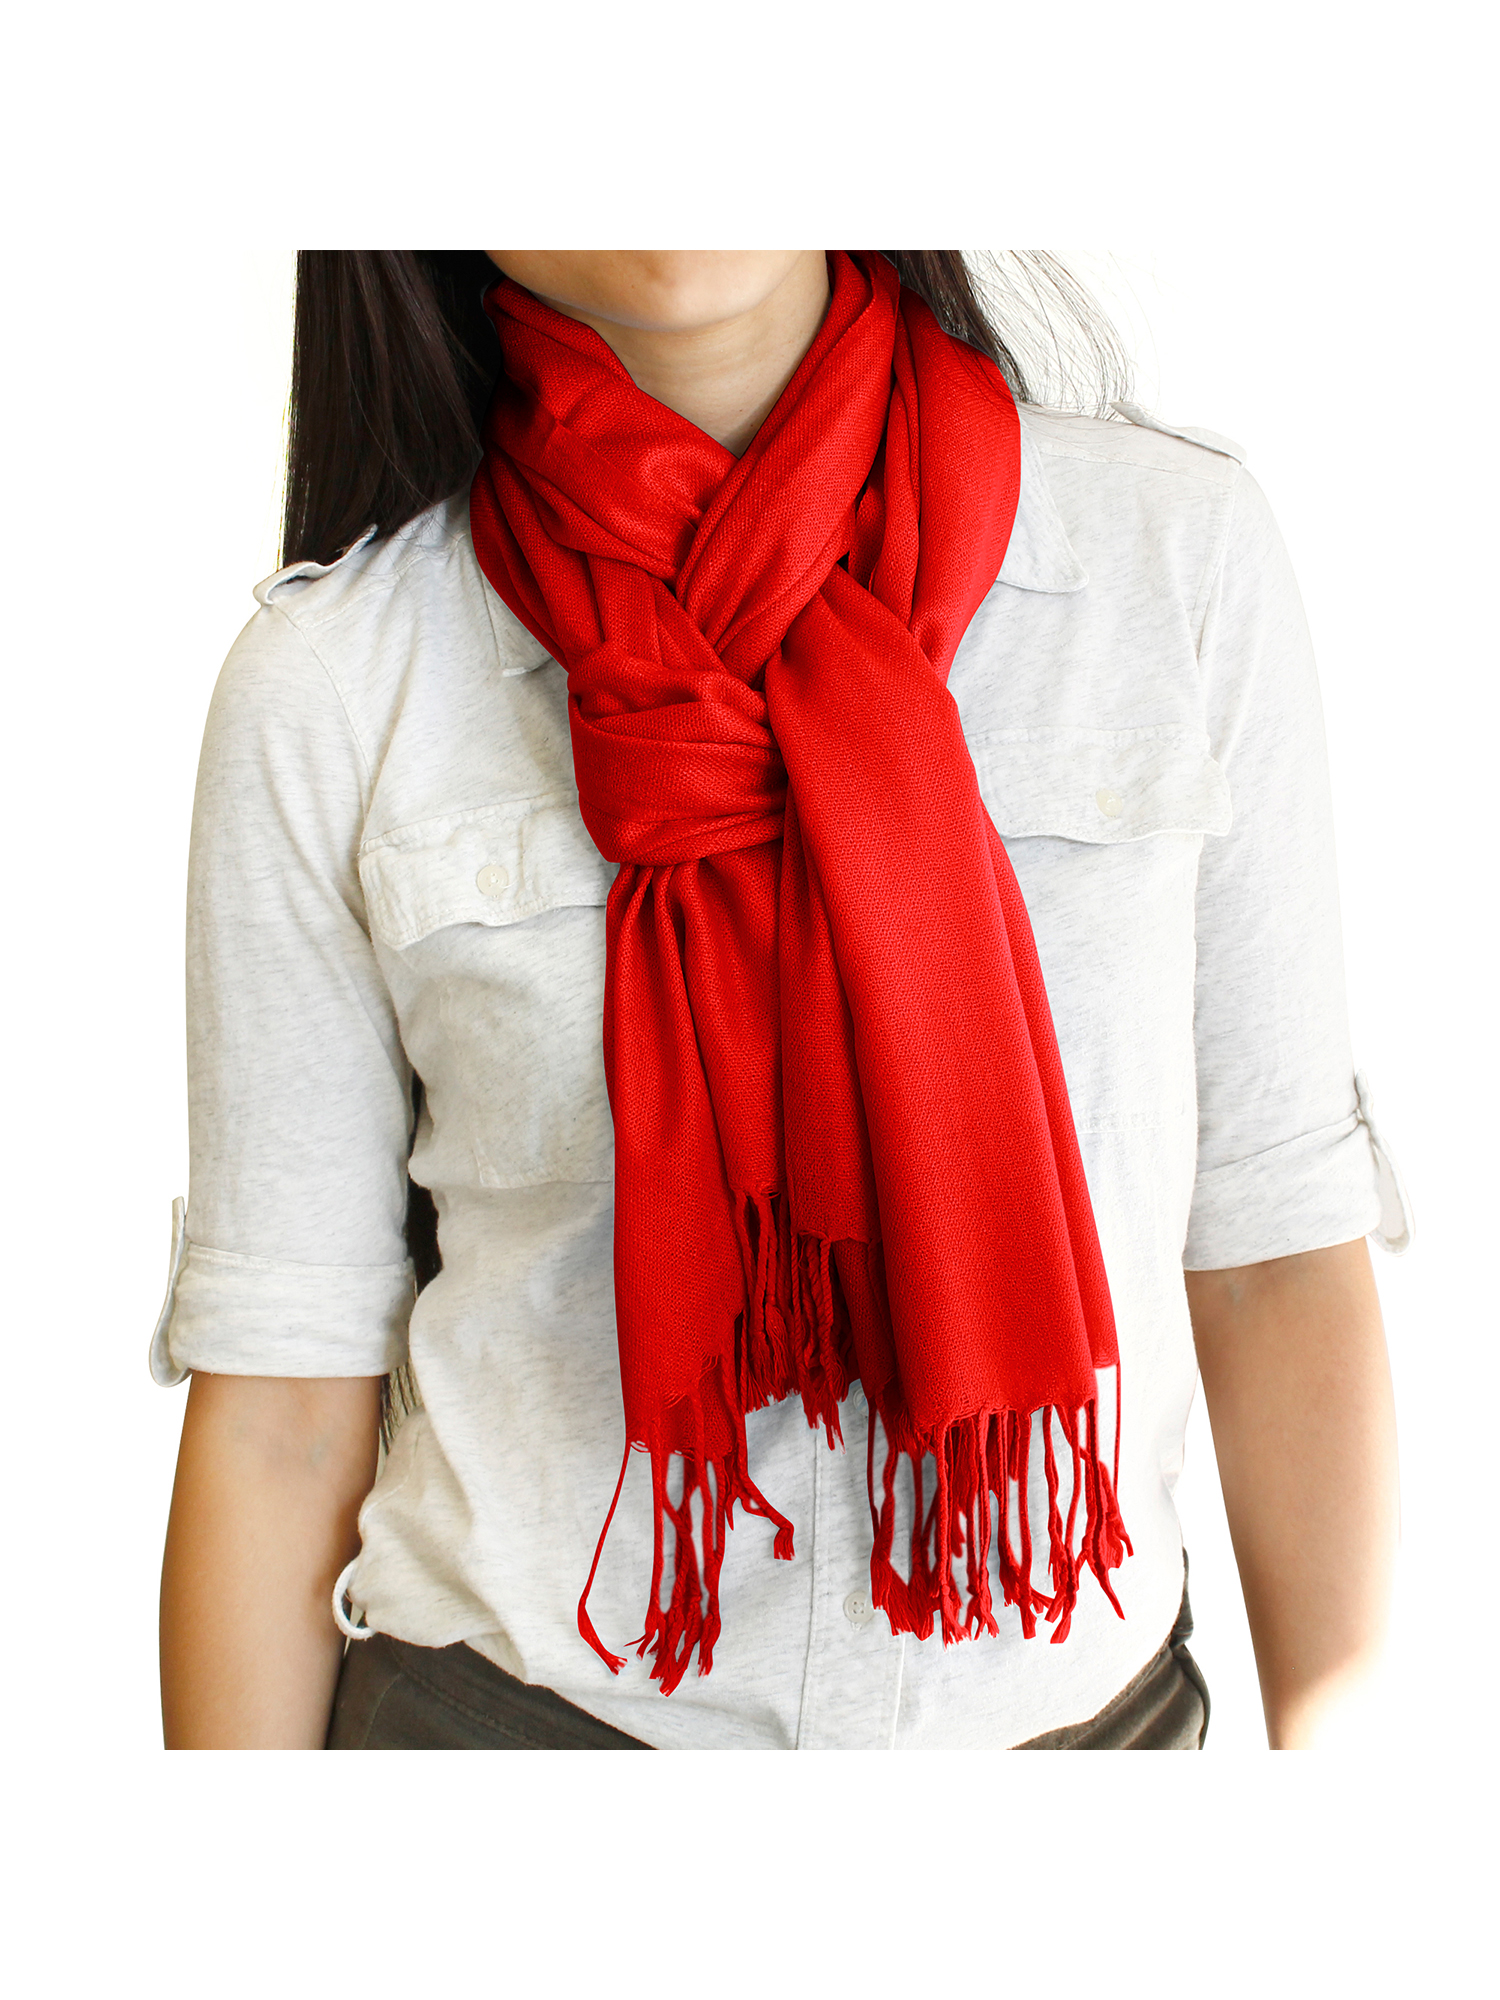 Fashion Women's Scarf Lightweight Long Scarfs Luxury Lady Classic Range Pashmina Silk Solid colors Wraps Shawl Stole Soft Warm Scarves For Women - image 2 of 5